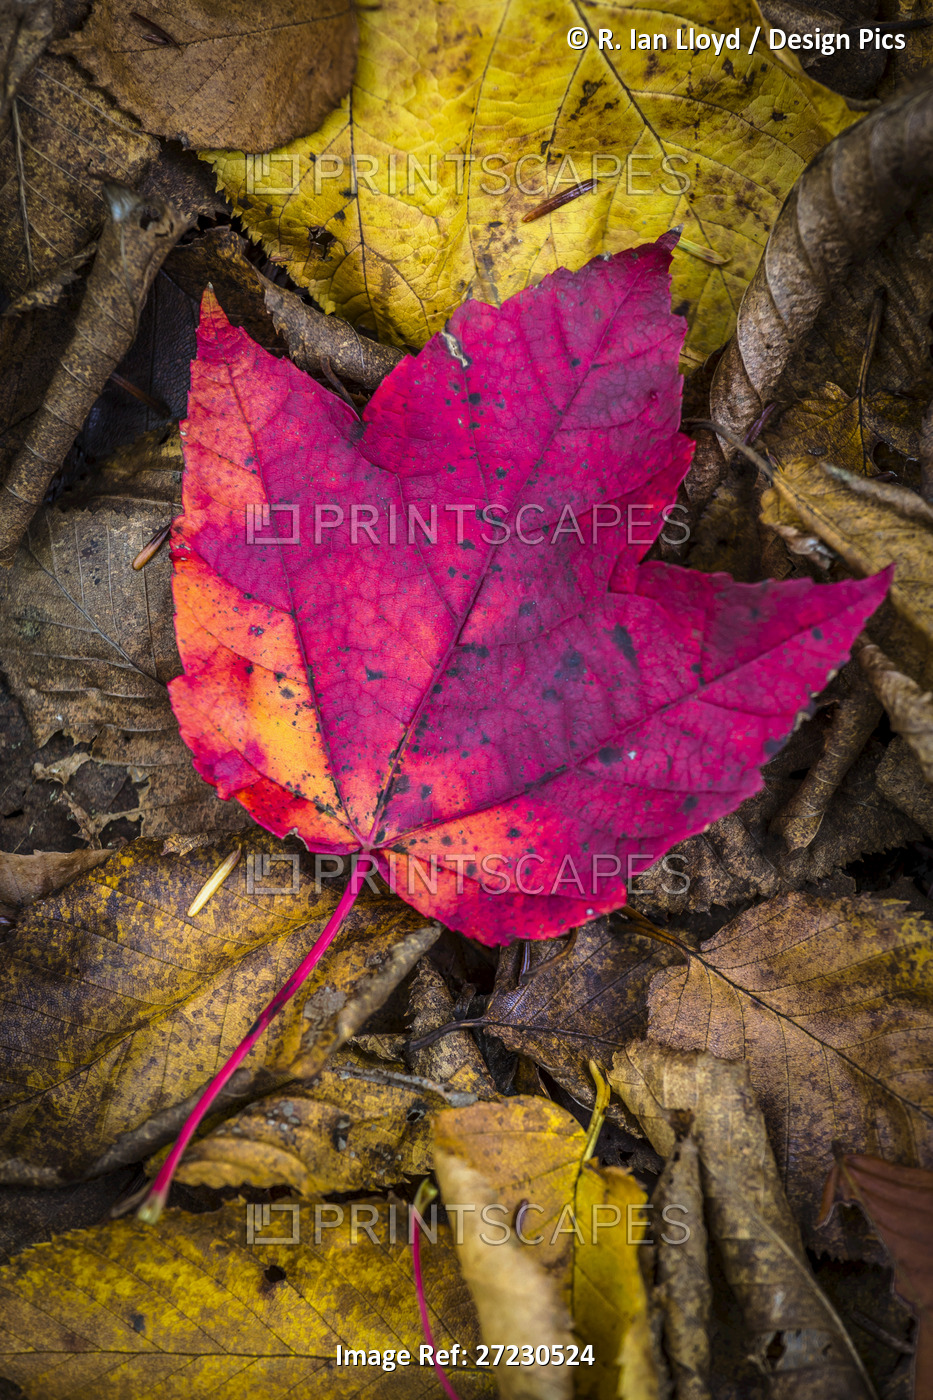 Close-Up of Red Maple Leaf on Forest Floor Amongst Brown Decomposing Leaves